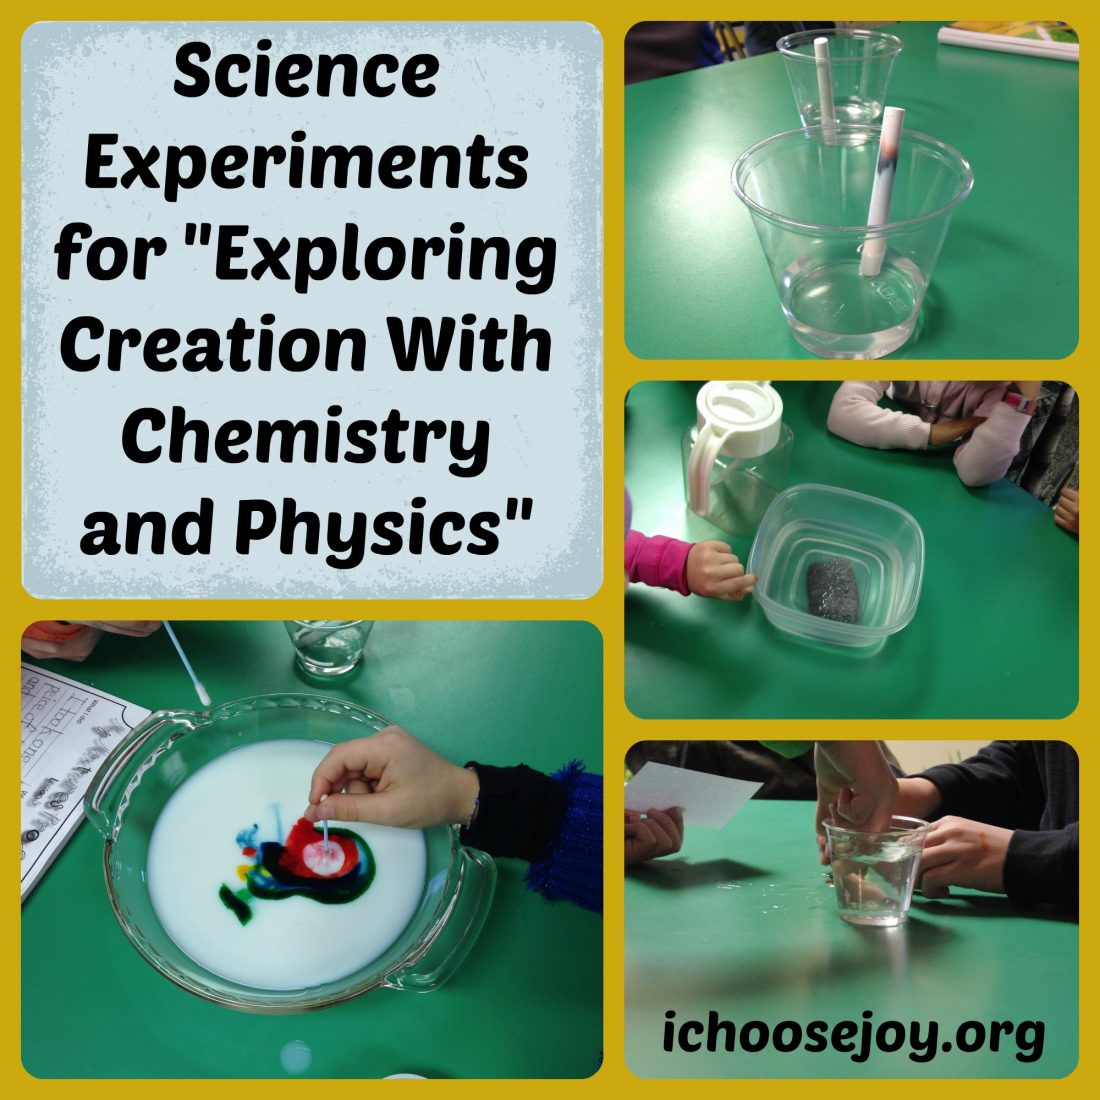 Our fun last year with “Exploring Creation With Chemistry and Physics”